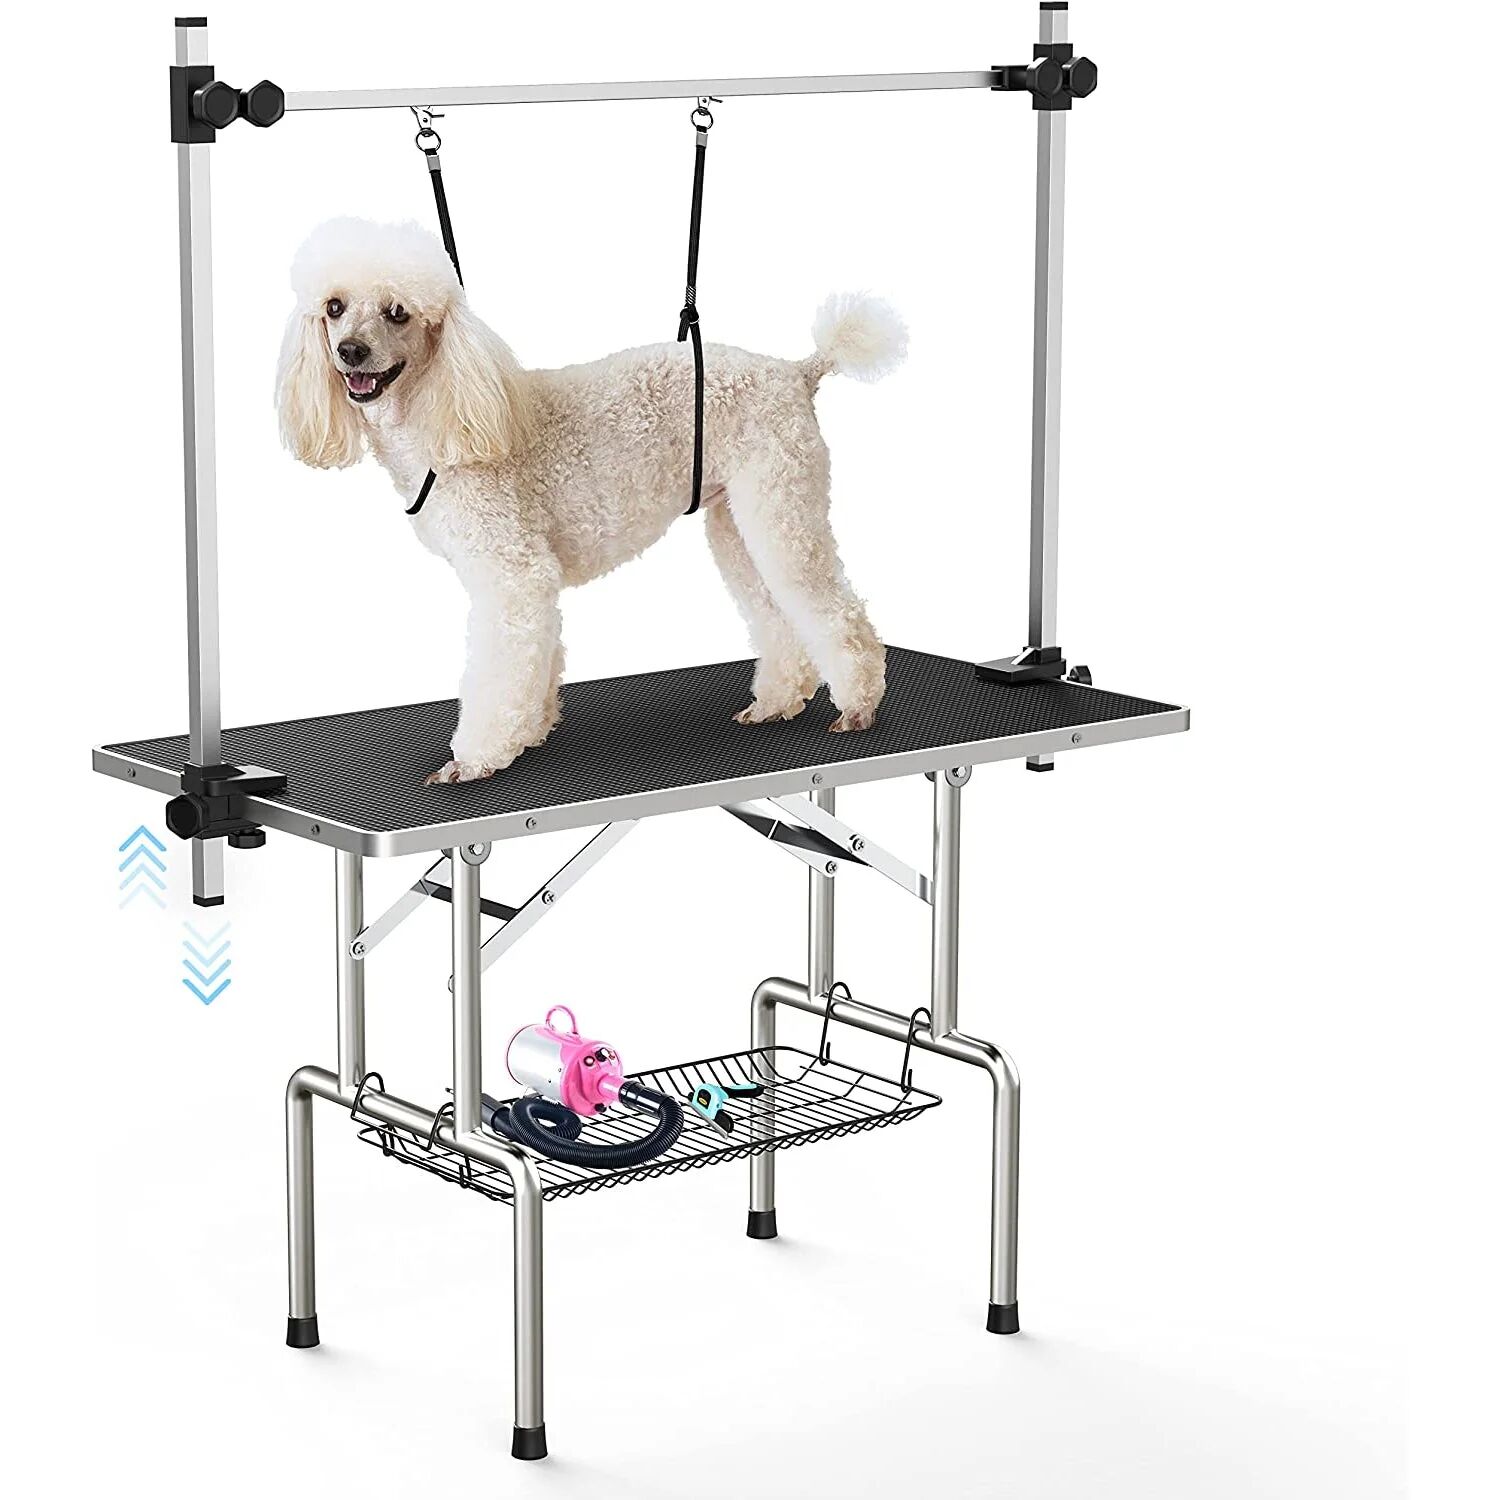 DailySale Adjustable Pet Large Foldable Dog Grooming Table with Arms